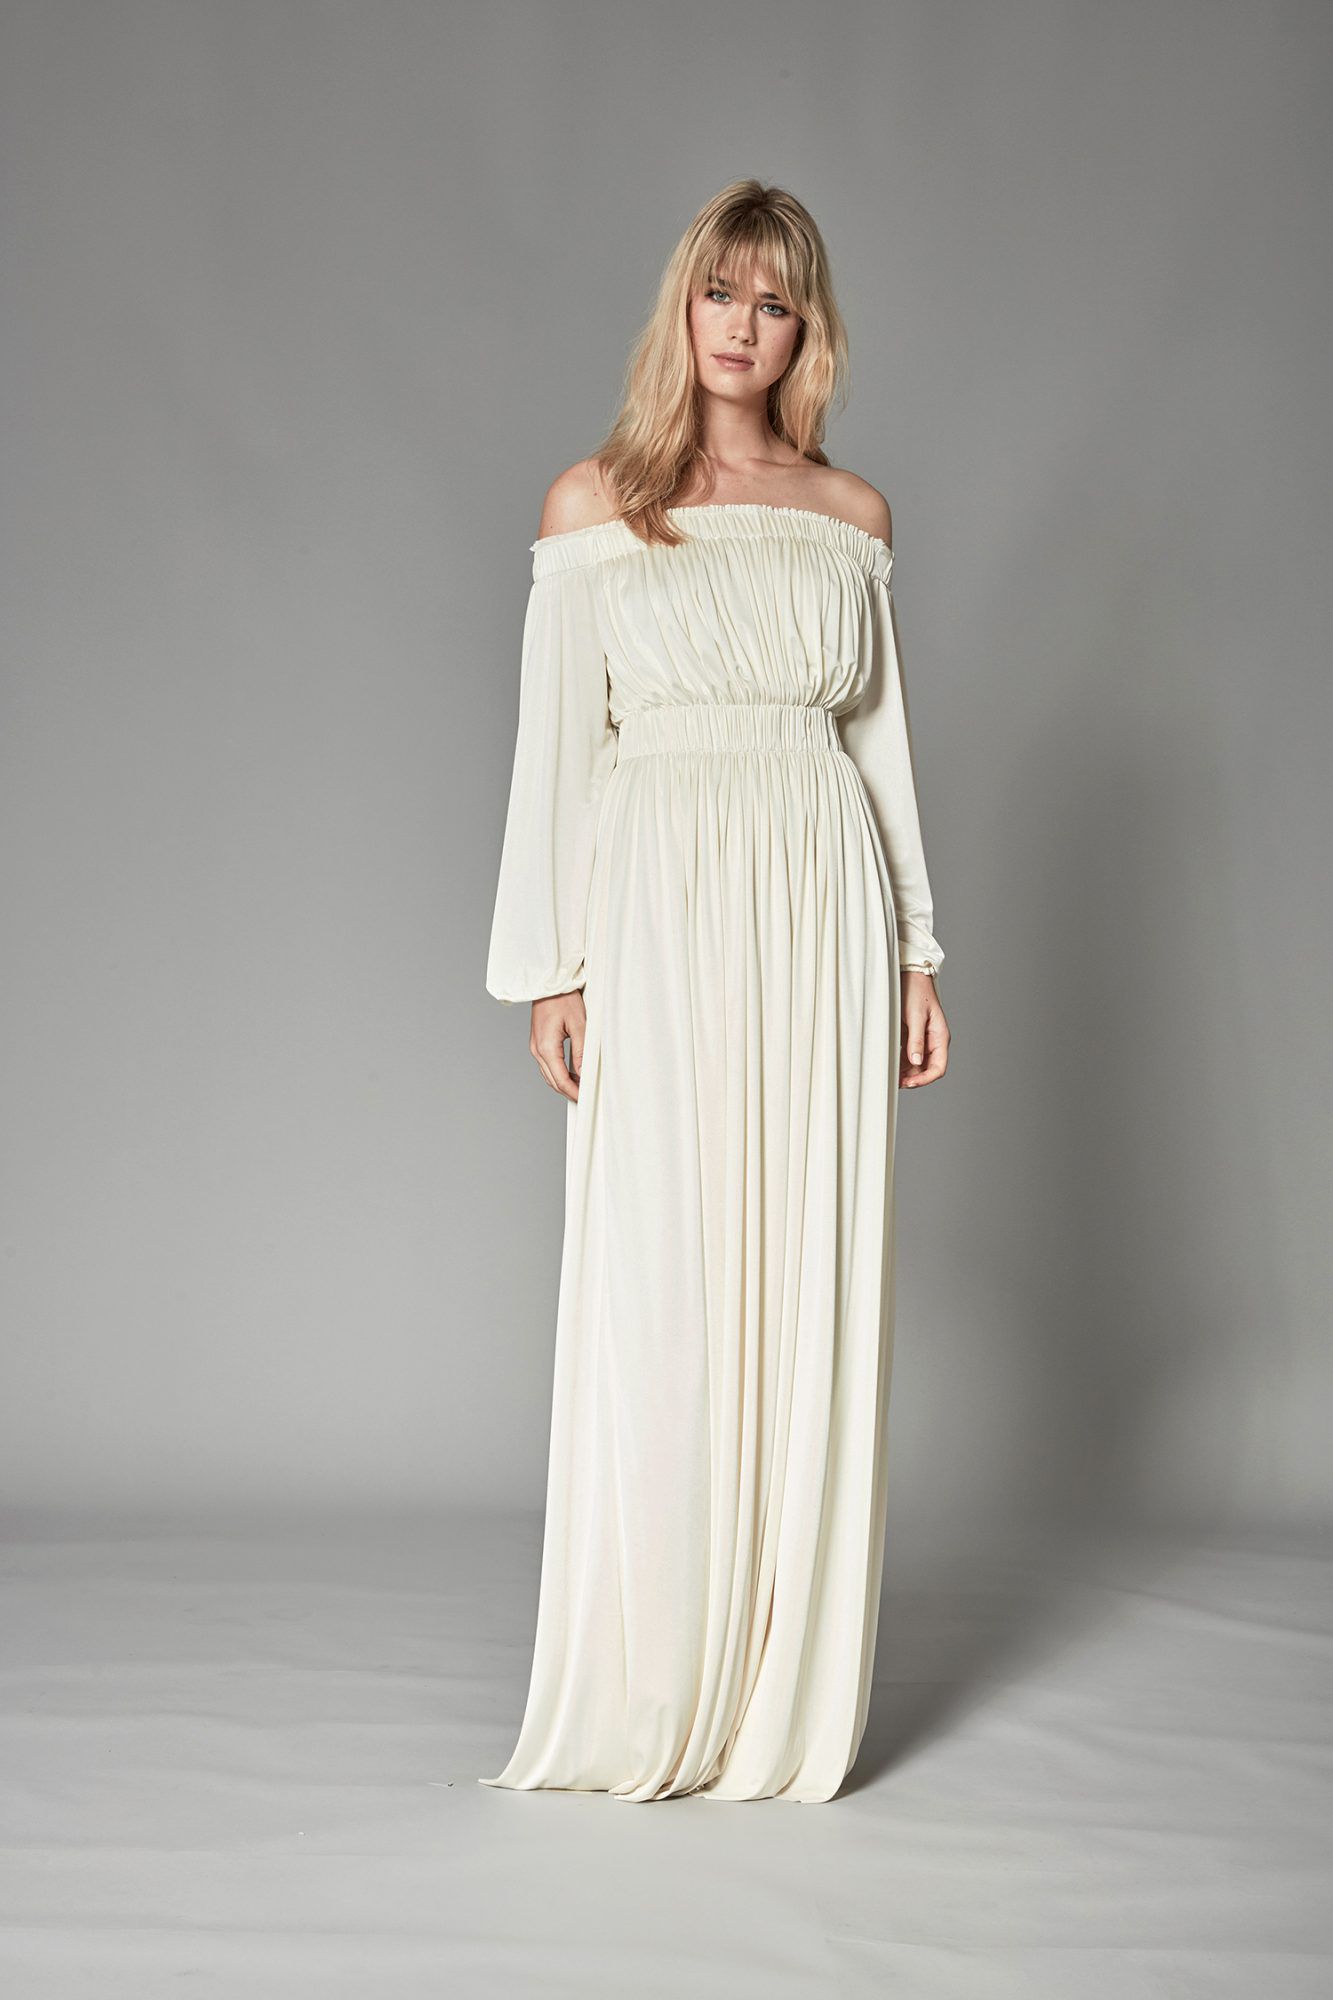 catherine deane fall 2018 off-the-shoulder cinched waist